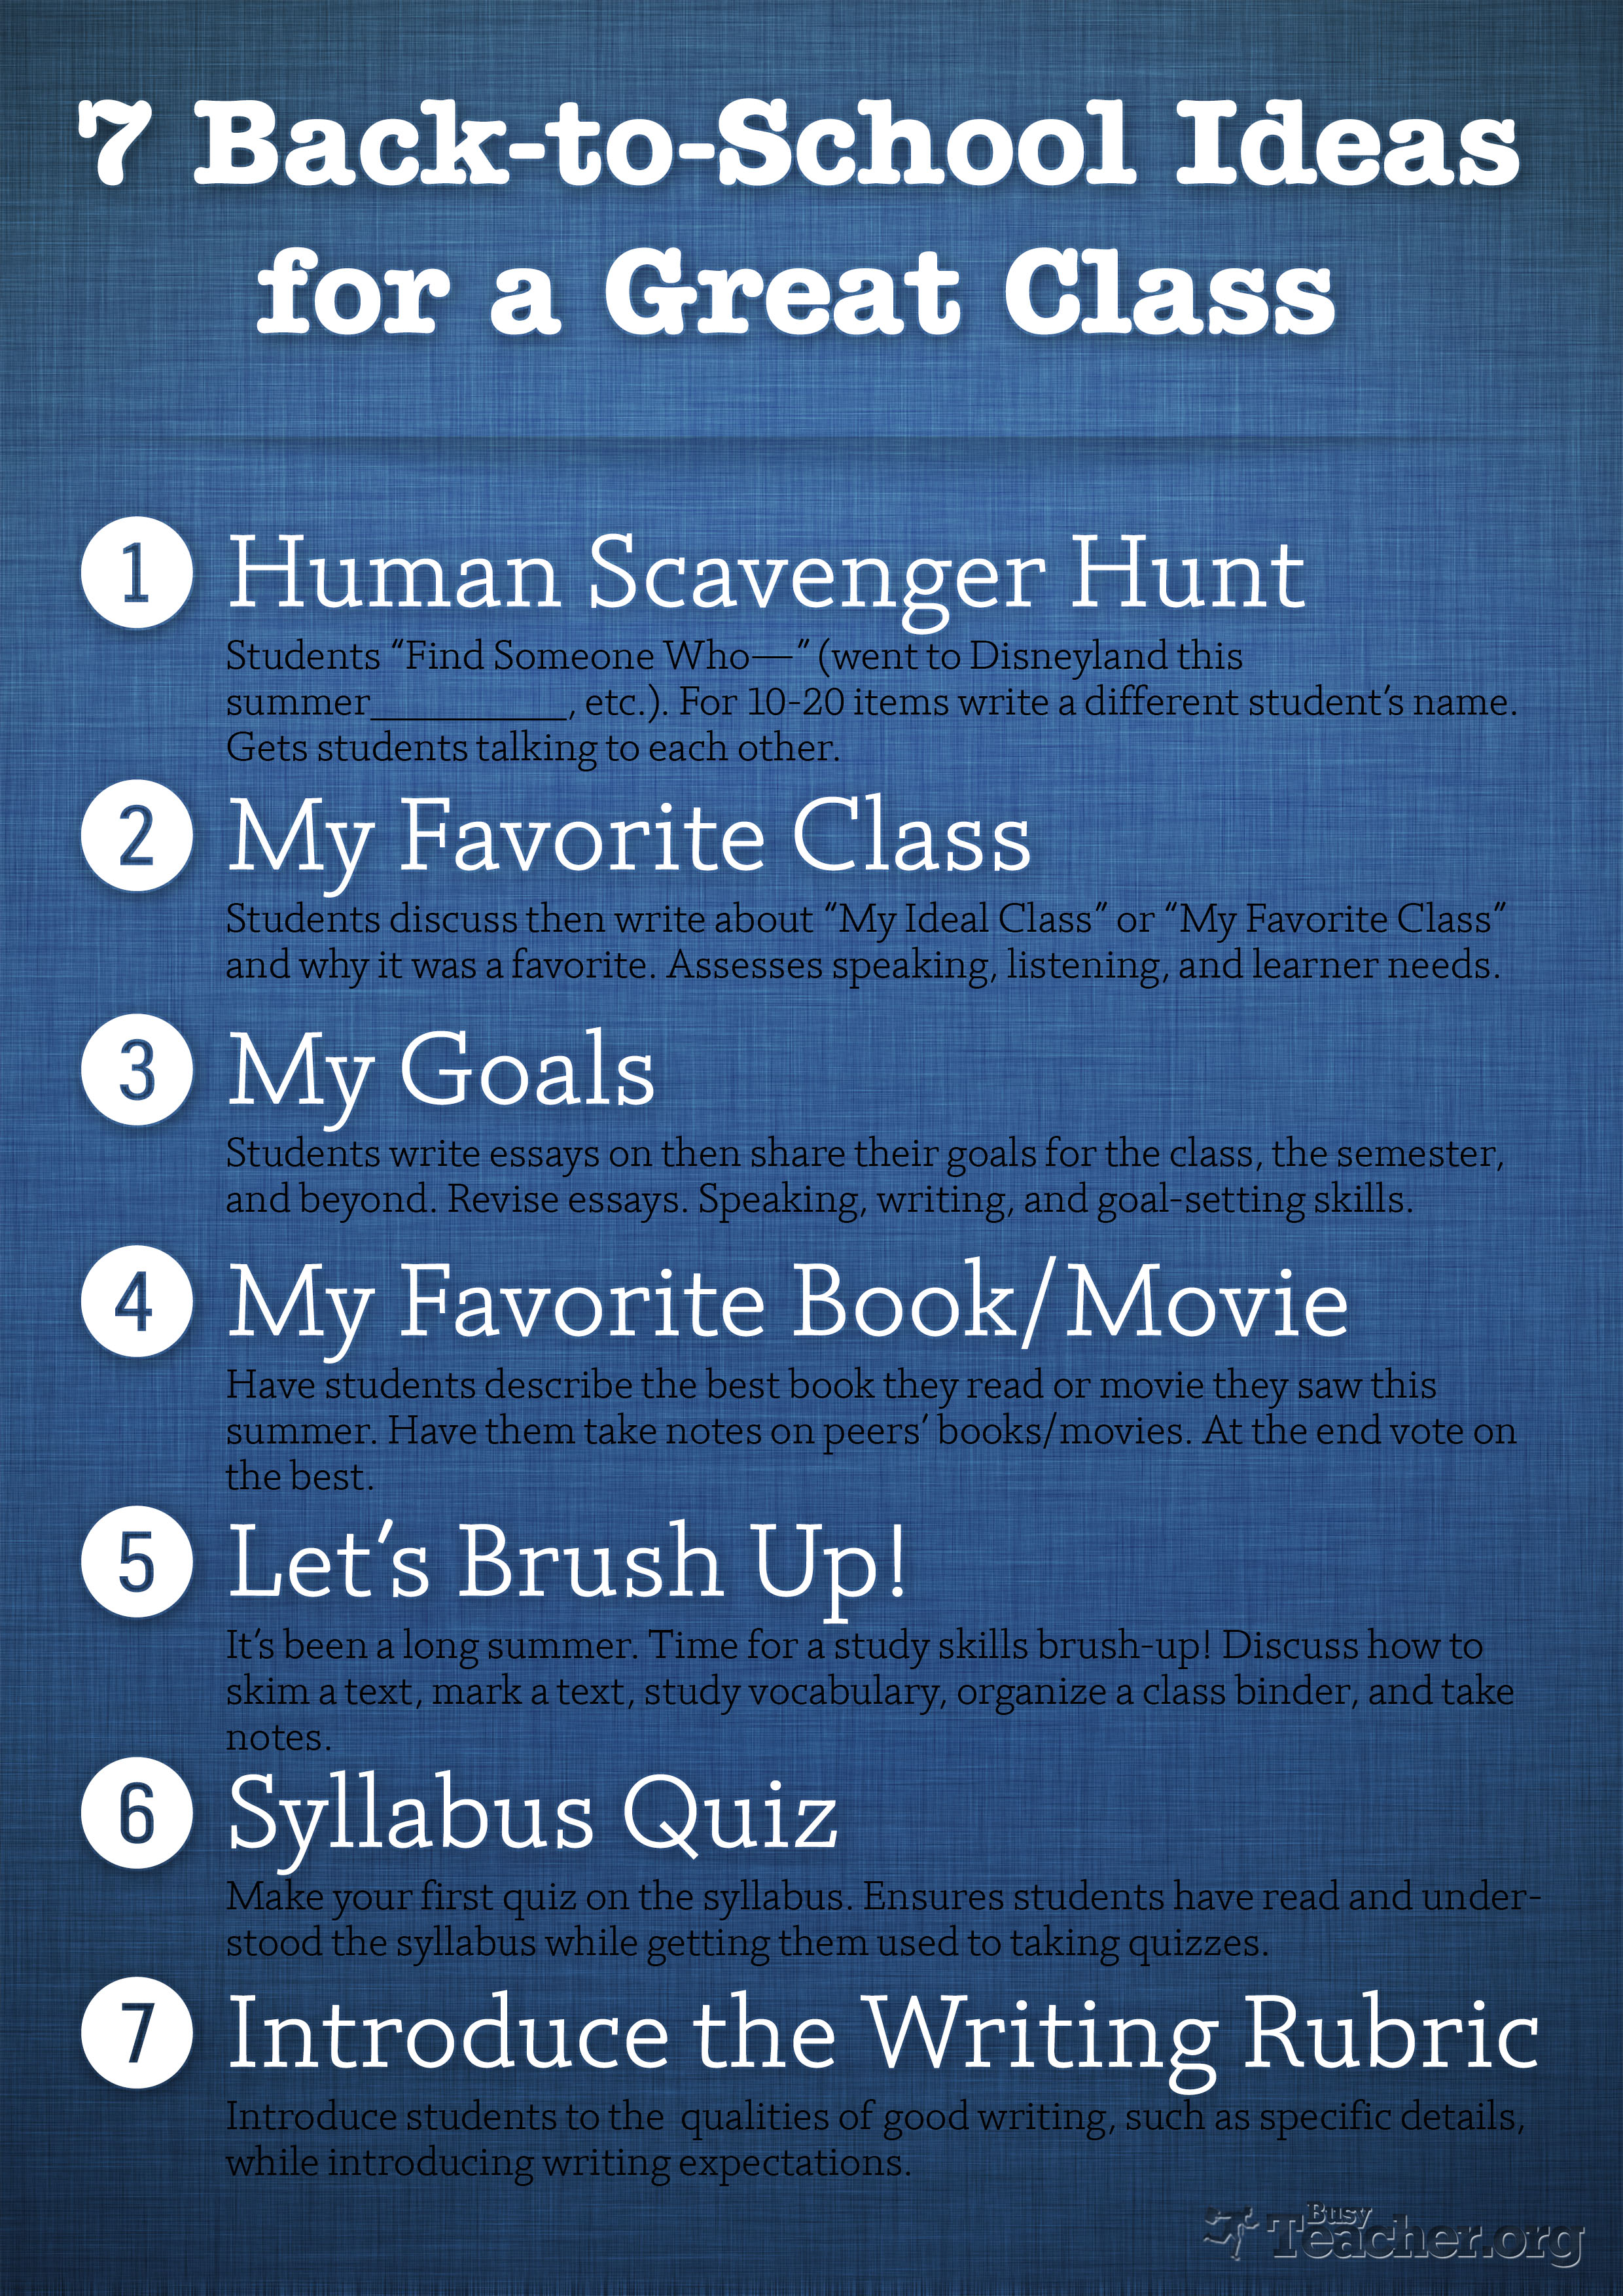 7-back-to-school-ideas-for-a-great-class-poster